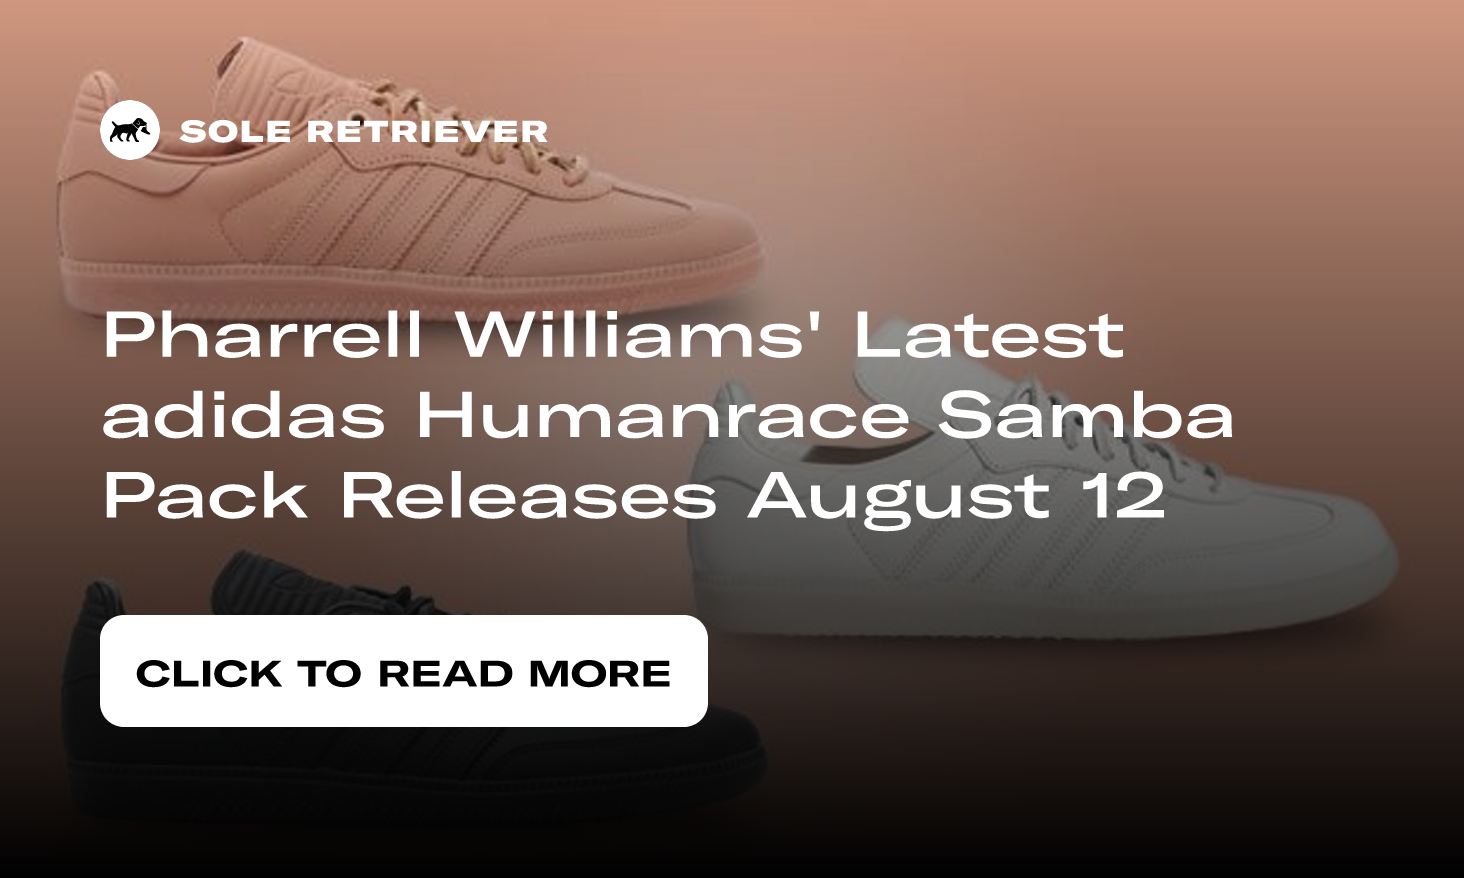 Pharrell Williams to make an appearance at the launch of adidas